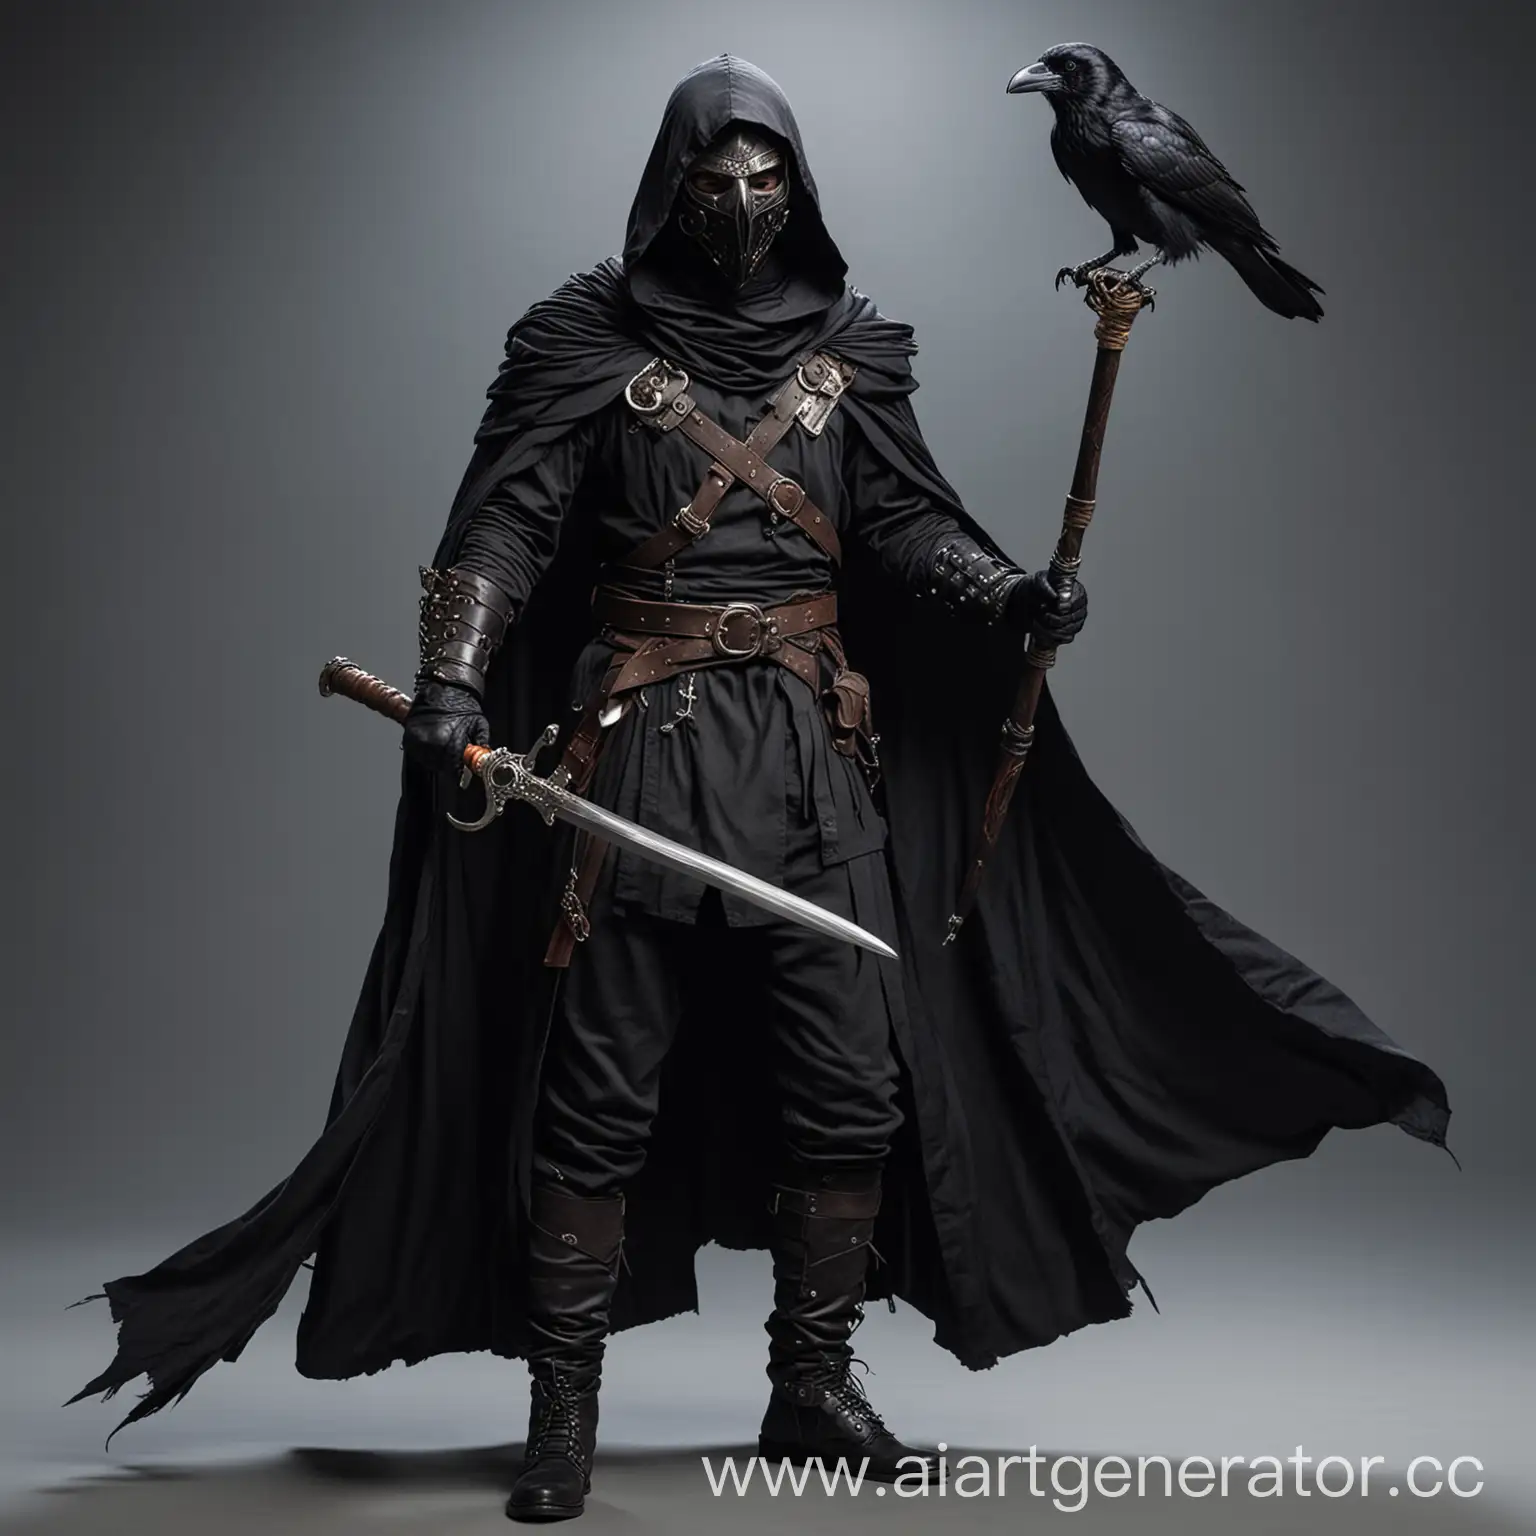 Mysterious-Assassin-with-Raven-Companion-and-Rapier